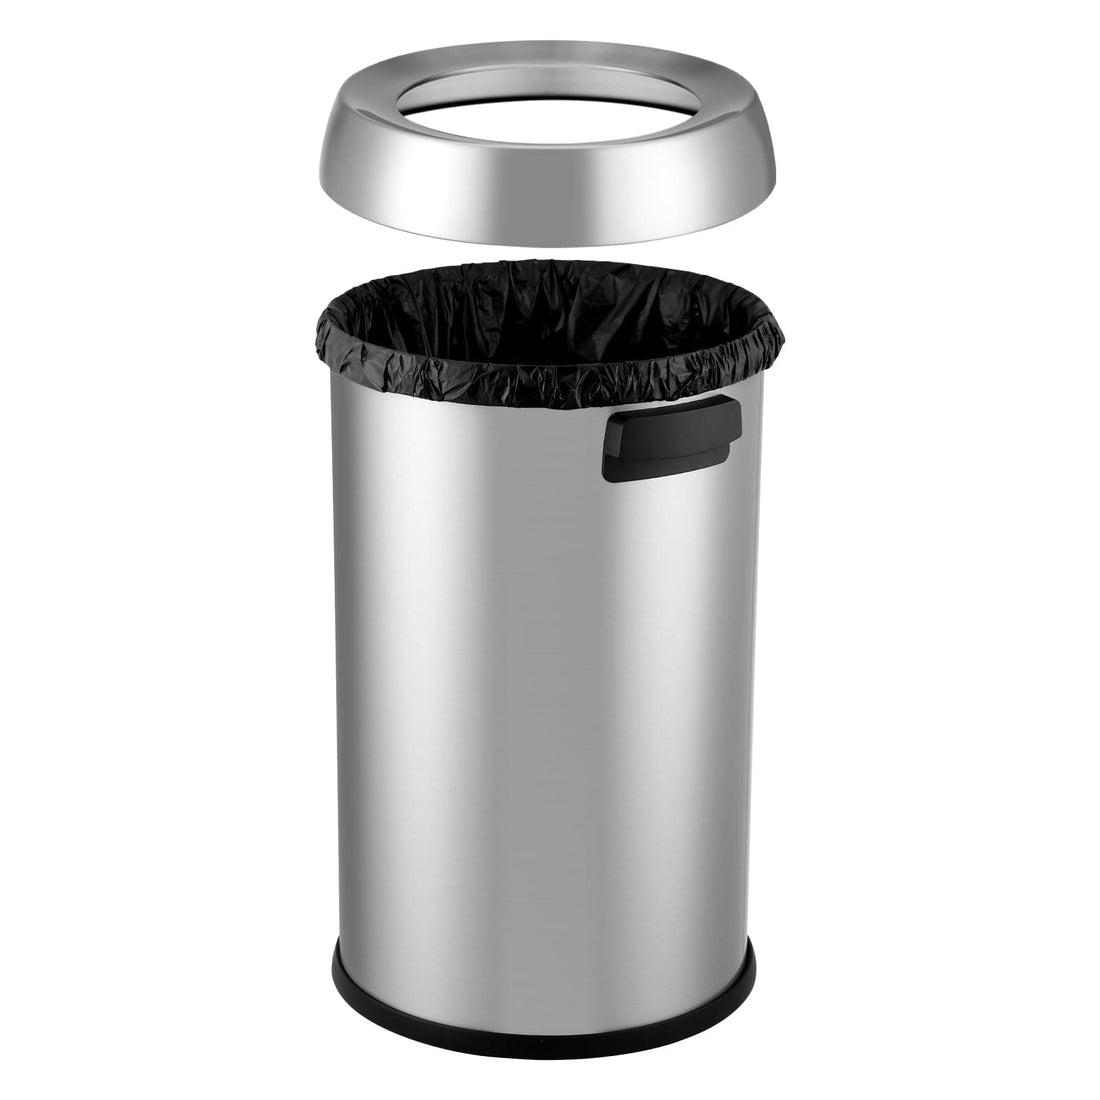 GARVEE 65 L / 17 Gal Open Top Trash Can Commercial Grade Heavy Duty Brushed Stainless Steel Waste Bins